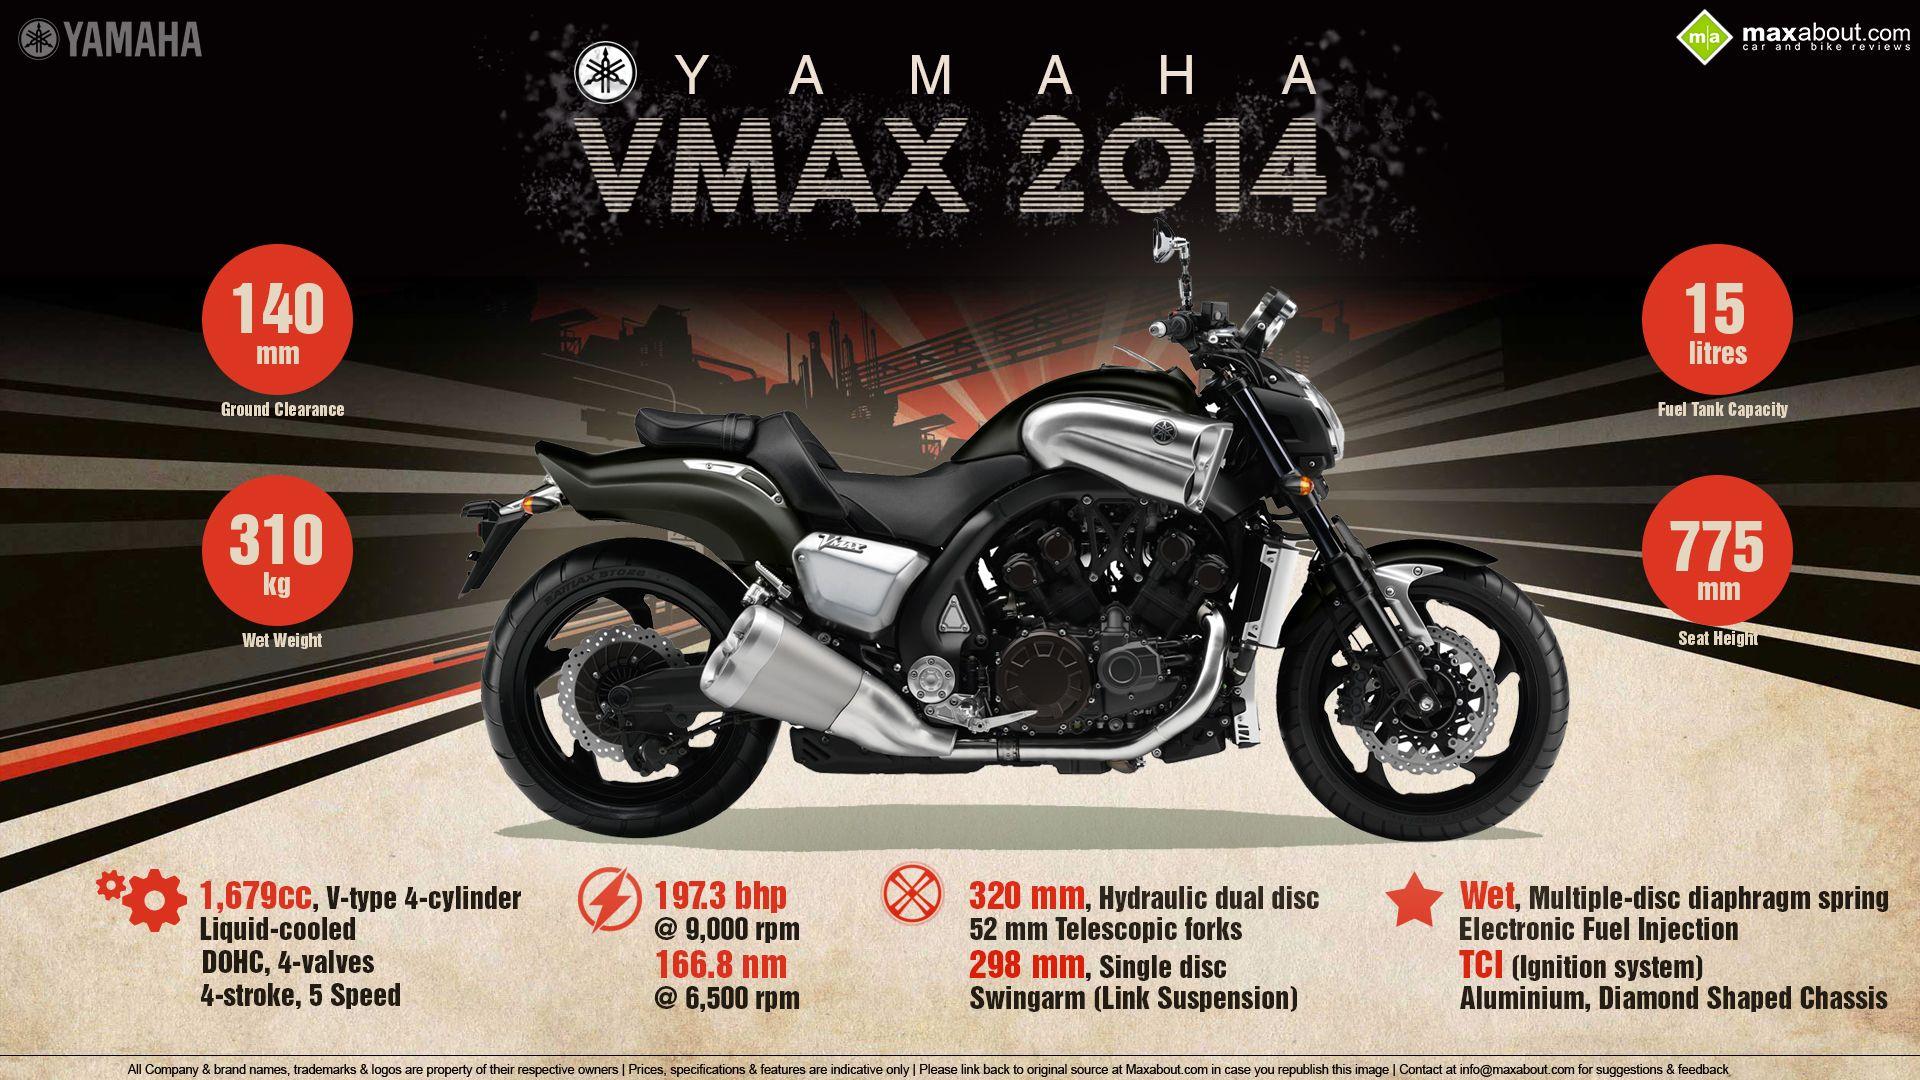 Things You Need to Know about the 2014 Yamaha VMAX